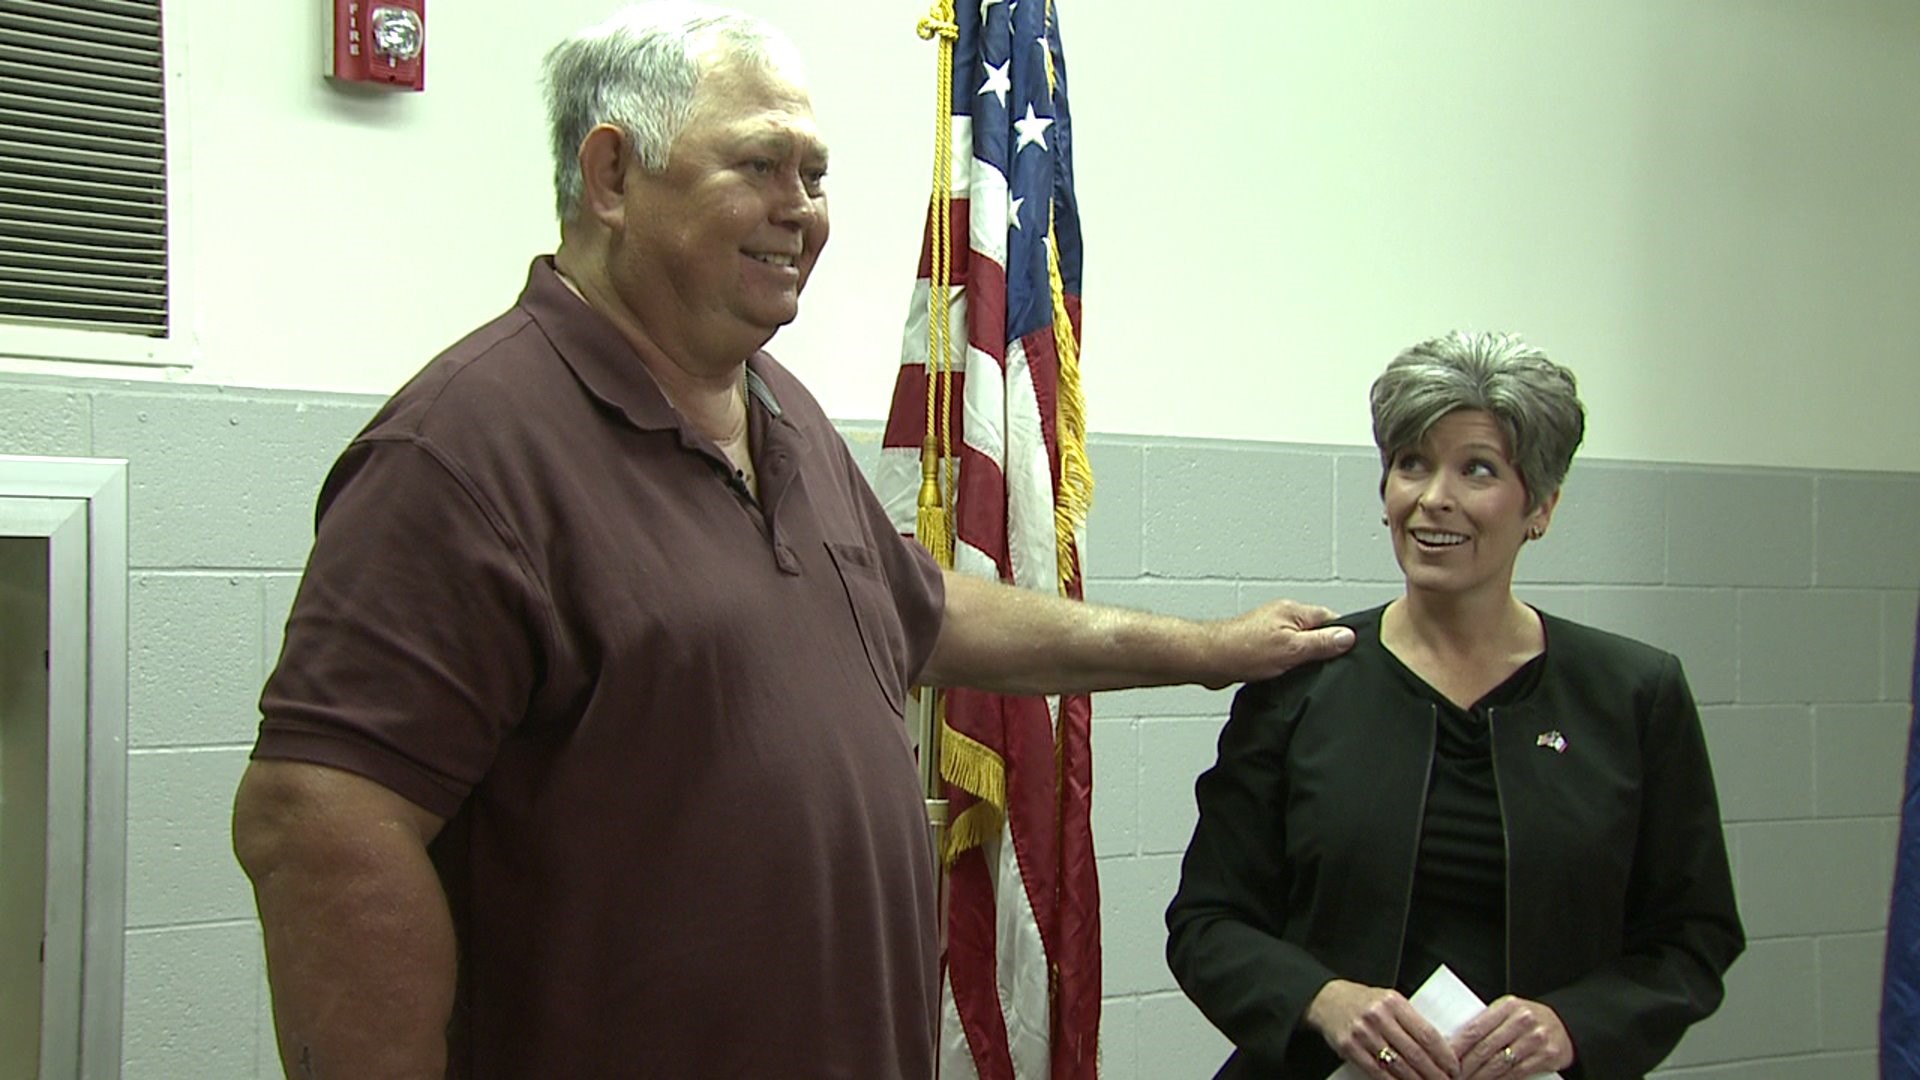 Vietnam veteran presented with medals 50 years after enlisting